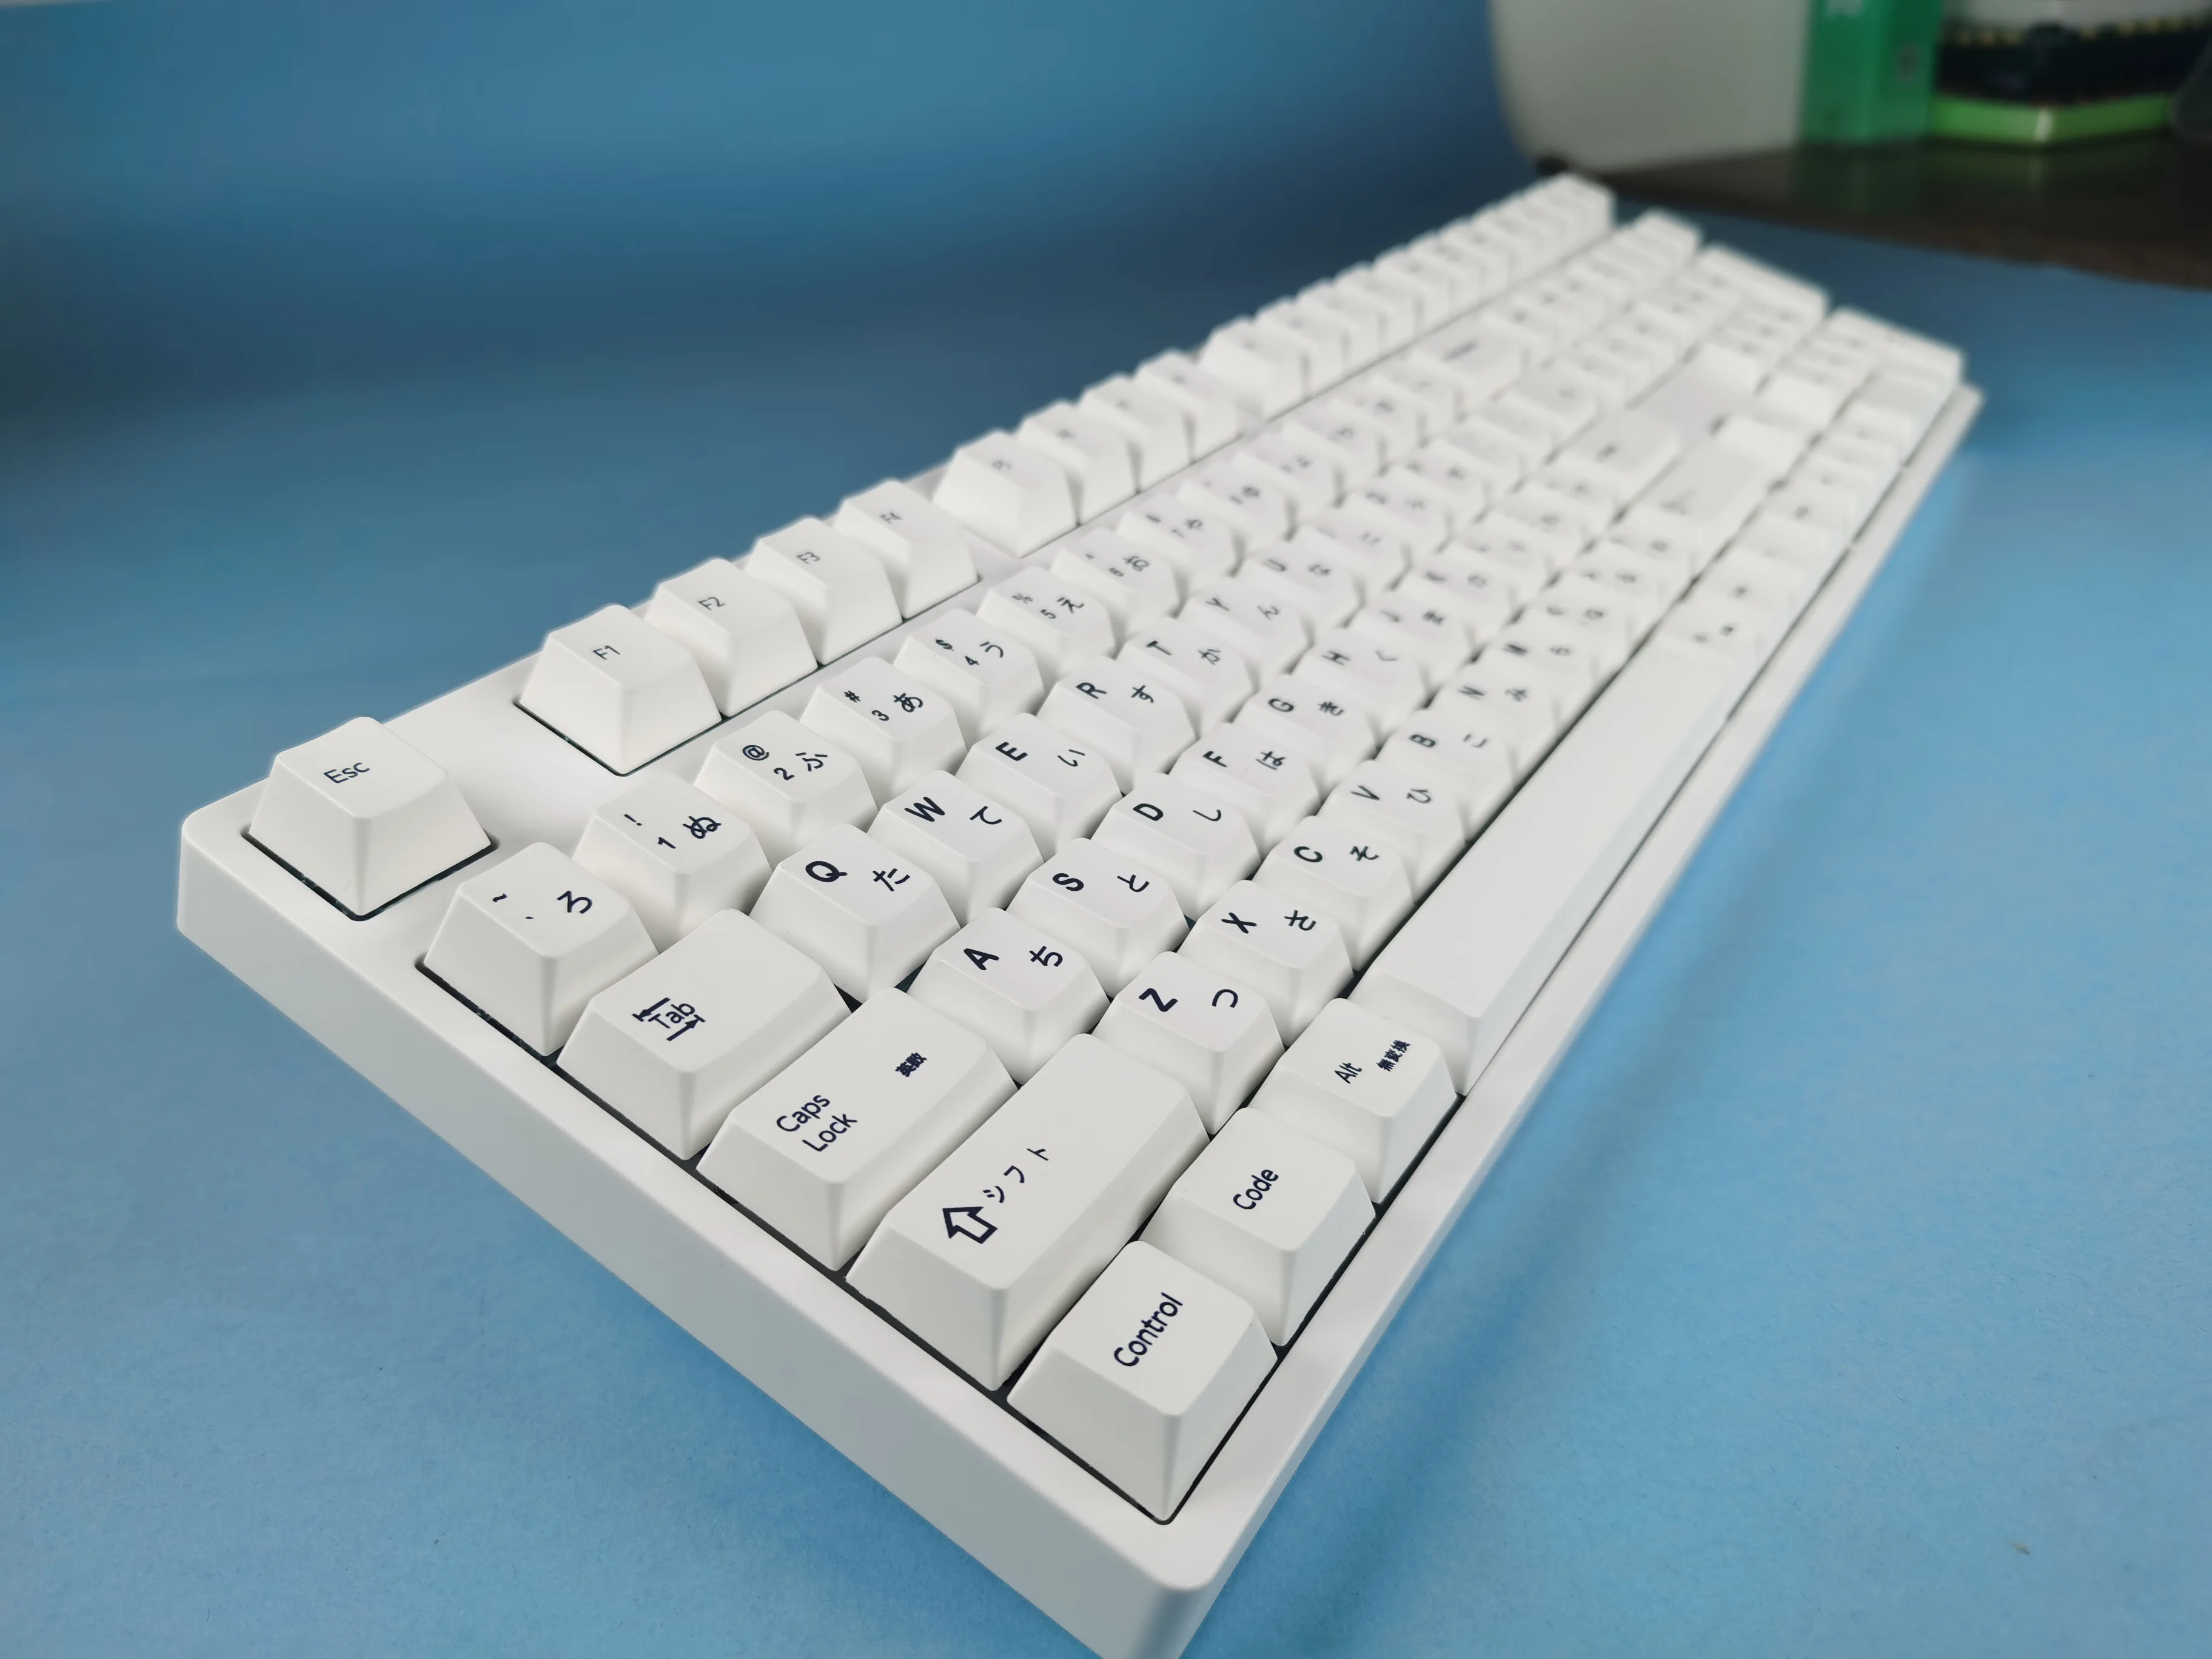 Cute Japanese PBT Cherry Profile Keycaps For Mechanical Keyboard White Minimalism 143 Key Cap DYE Subbed WIth MX Gamepad Touch